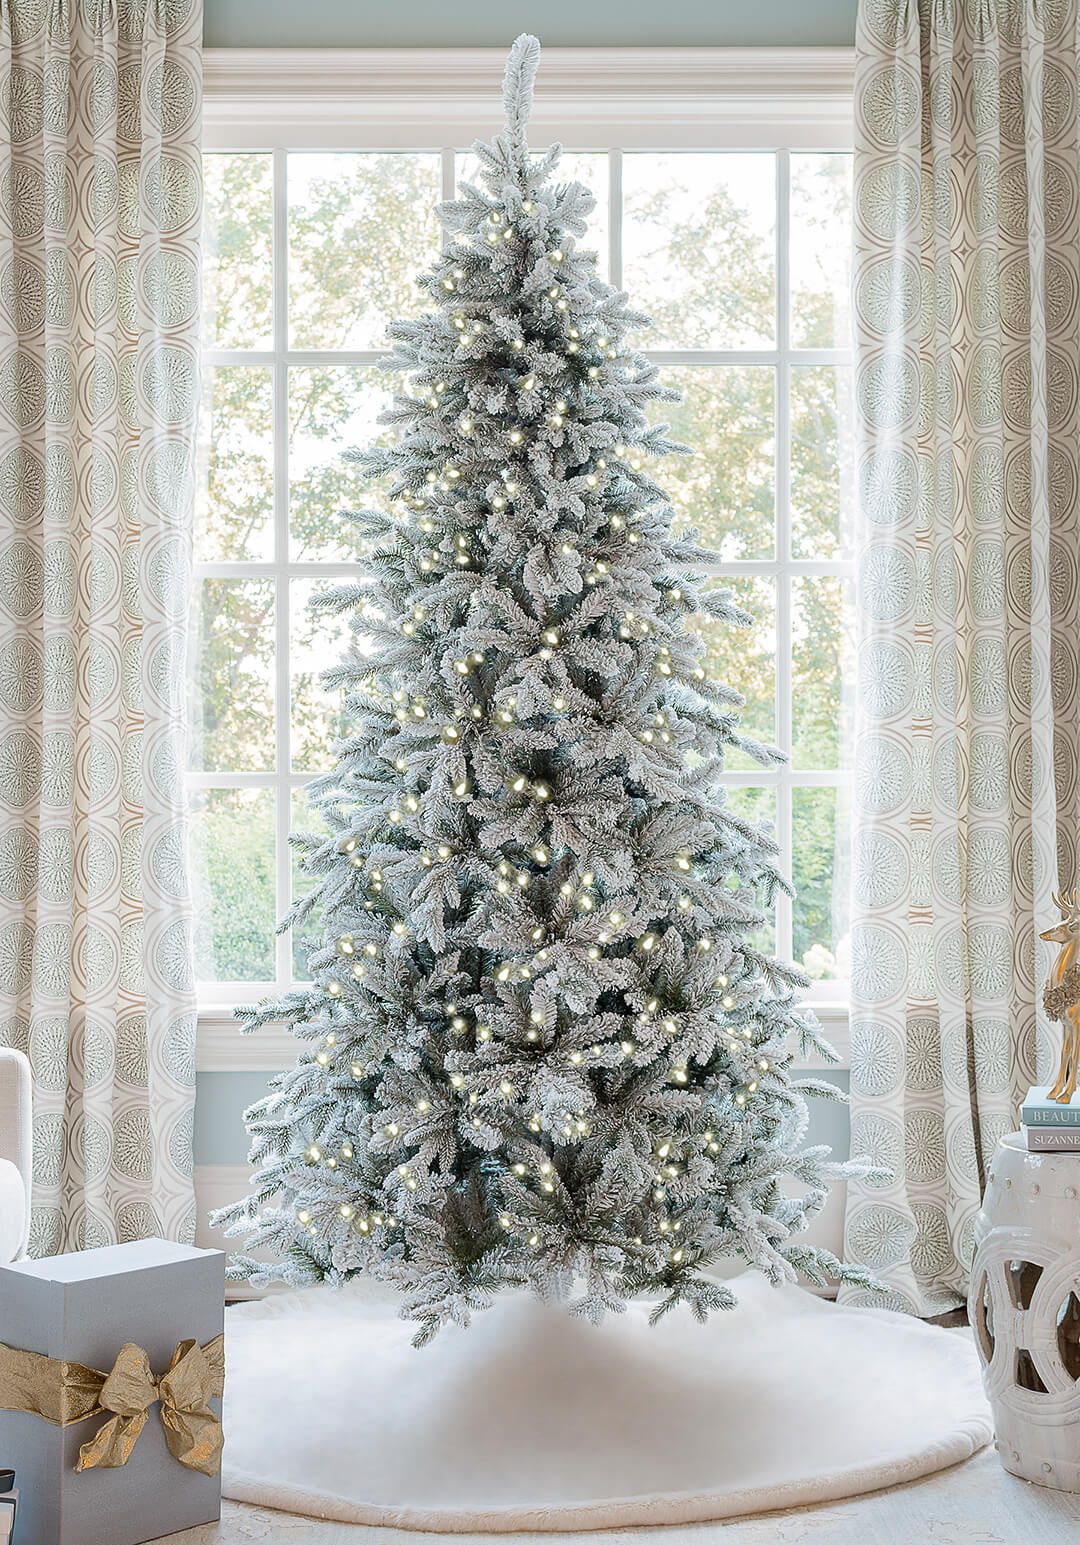 8' Queen Flock® Slim Artificial Christmas Tree With 700 Warm White LED Lights | King of Christmas